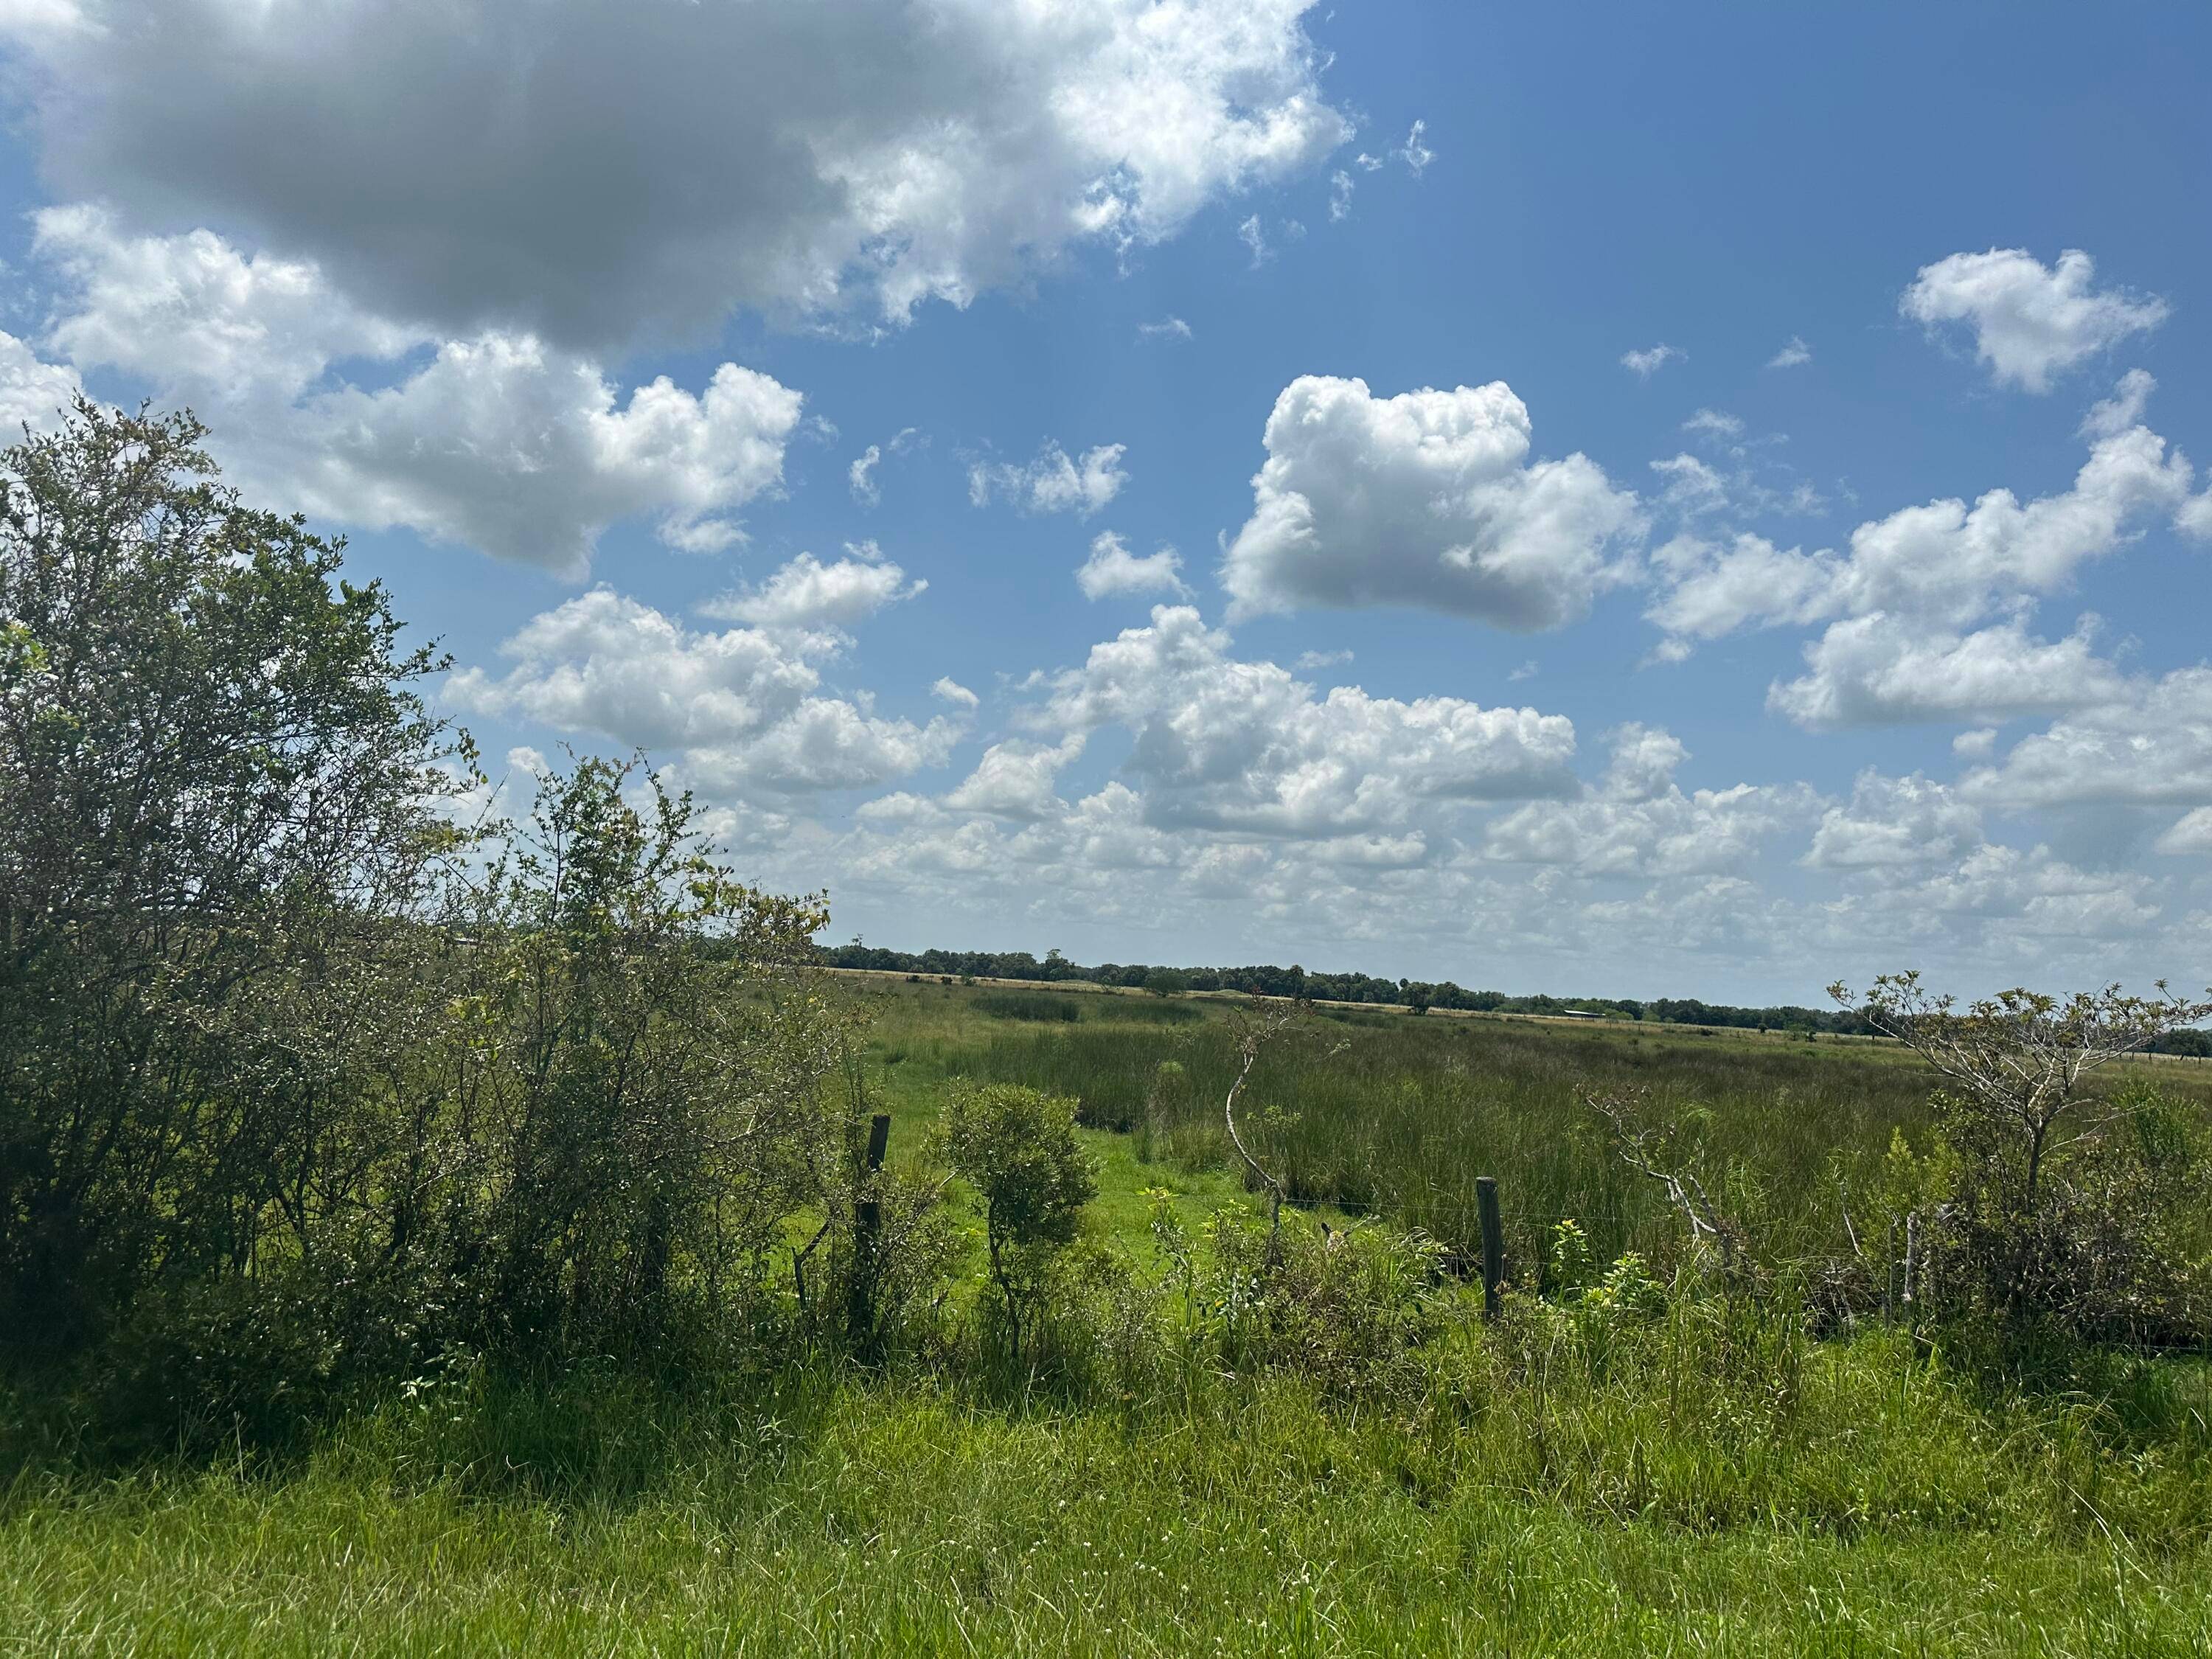 Escape to your own slice of paradise with this exceptional offering 21 acres of pristine, cleared land in the heart of South Florida.